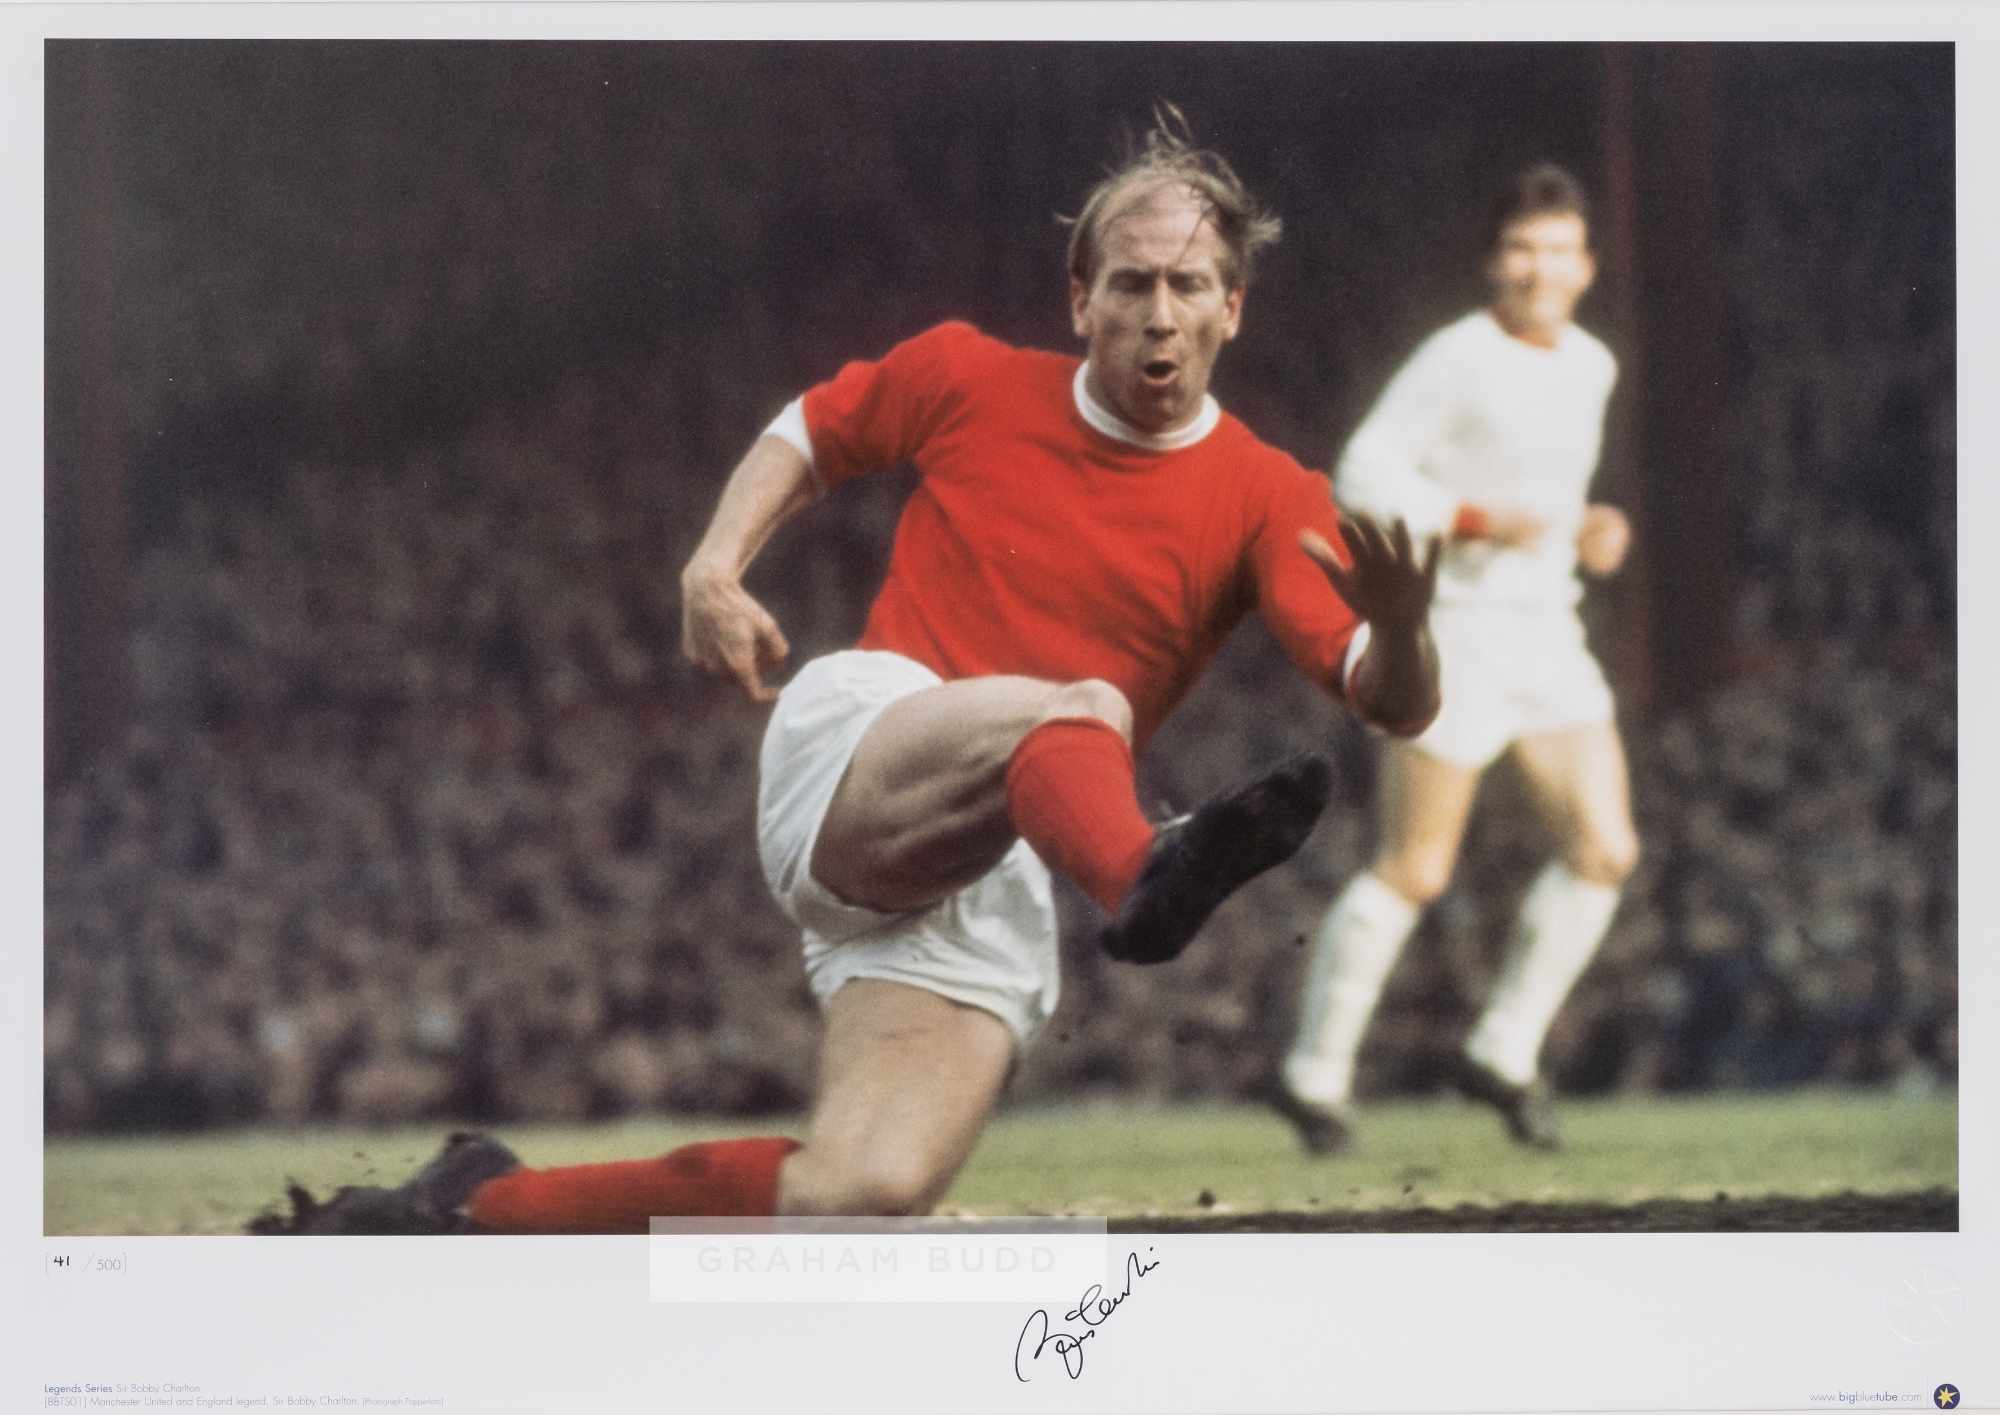 Legend Series Bobby Charlton signed colour photographic print, featuring Bobby Charlton in action on